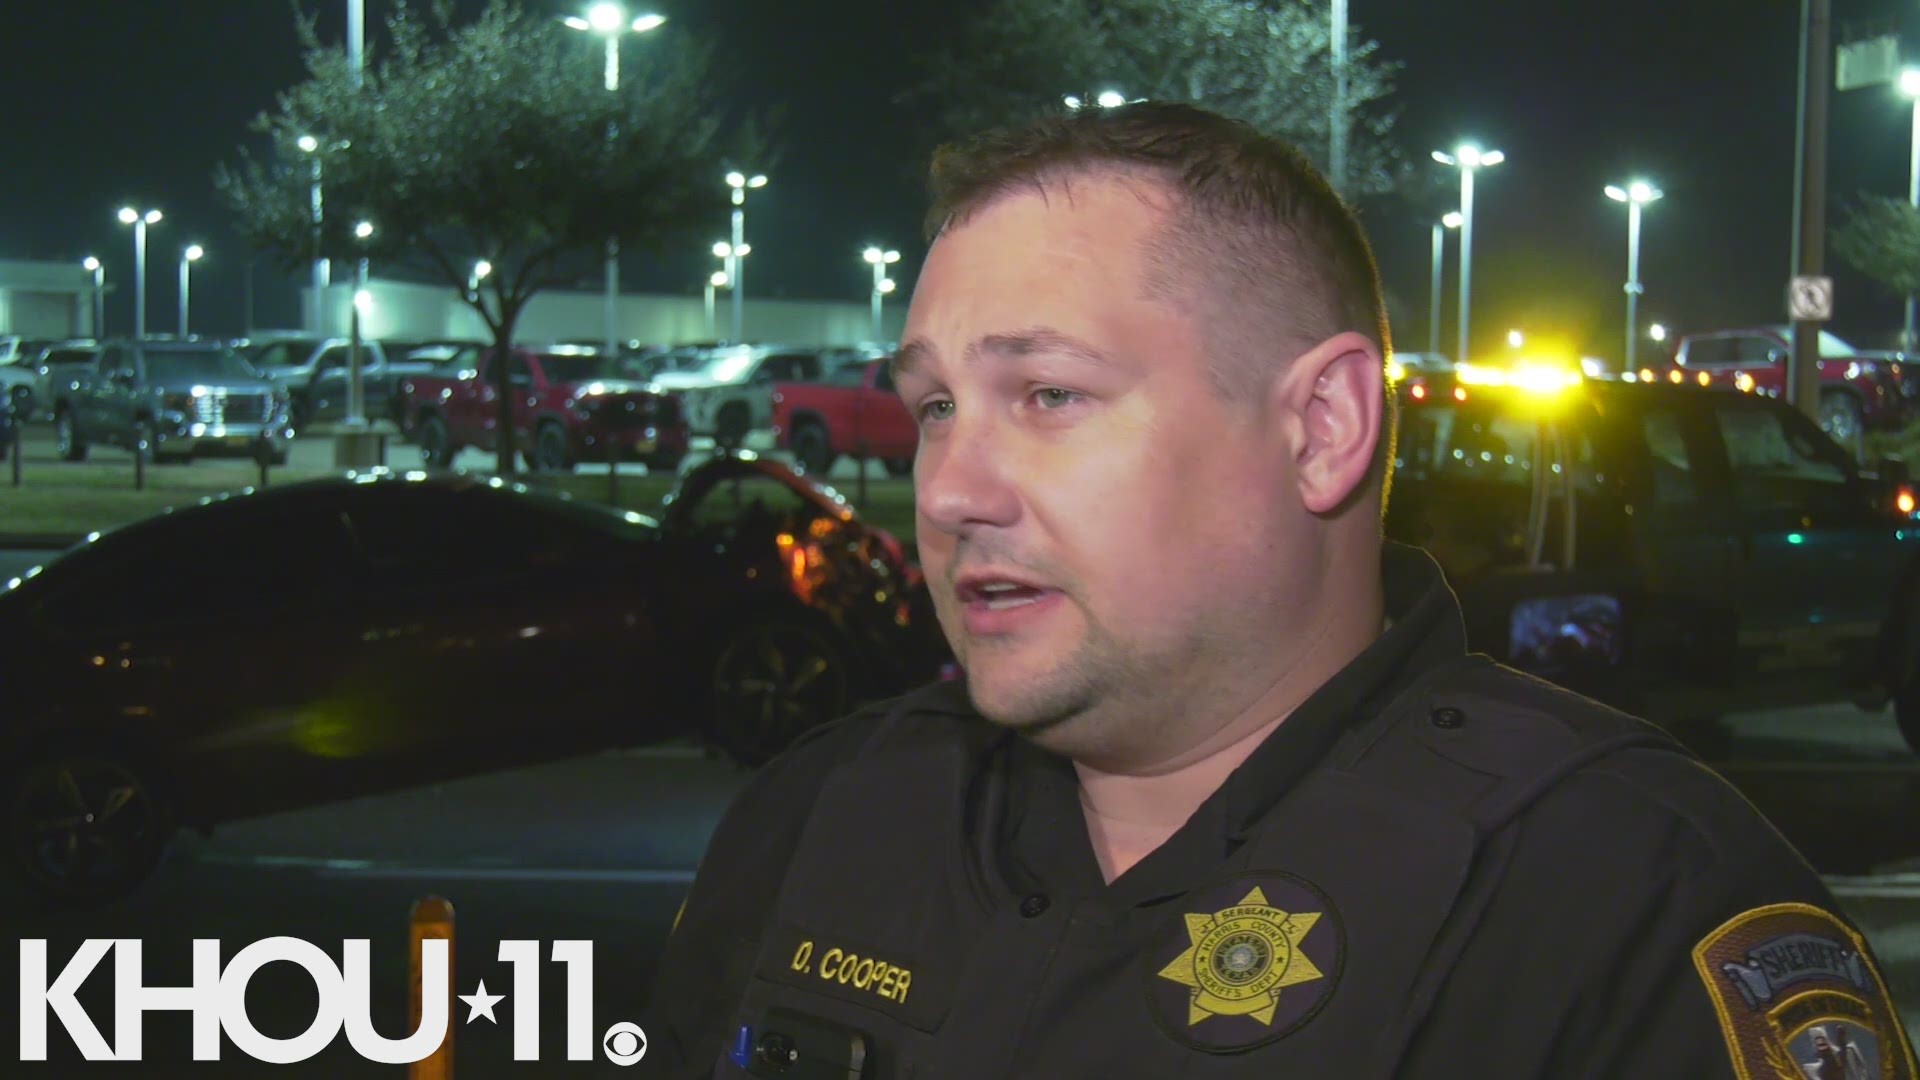 A Harris County Sheriff's Office deputy was injured in a crash involving a suspected intoxicated driver, according to investigators.